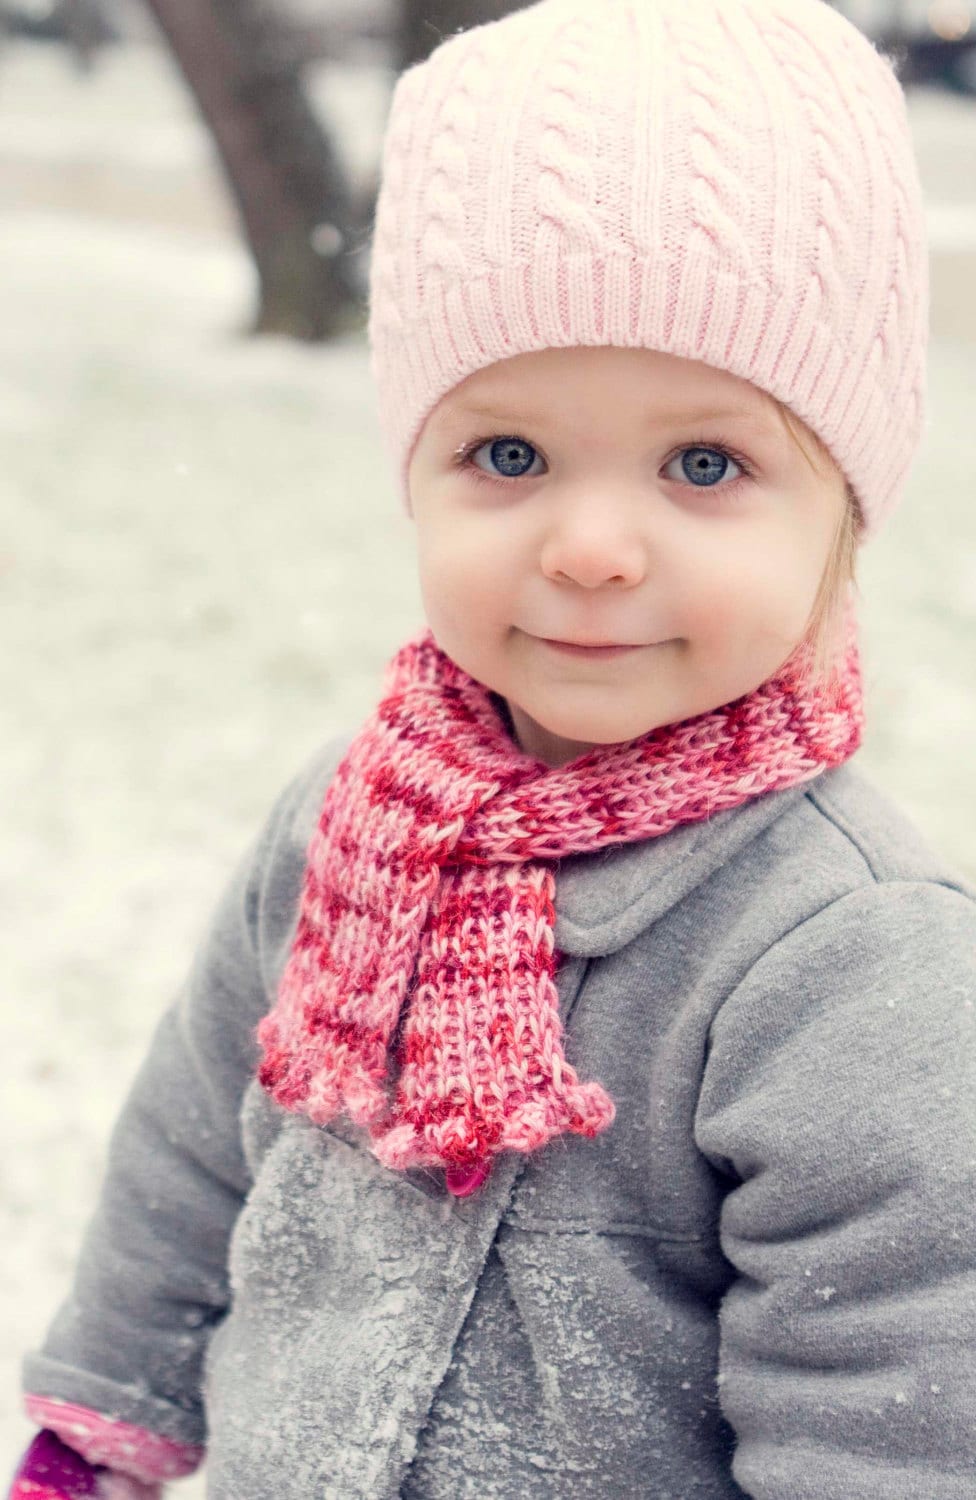 Little Bobble Scarf child's scarf knitting pattern by ...